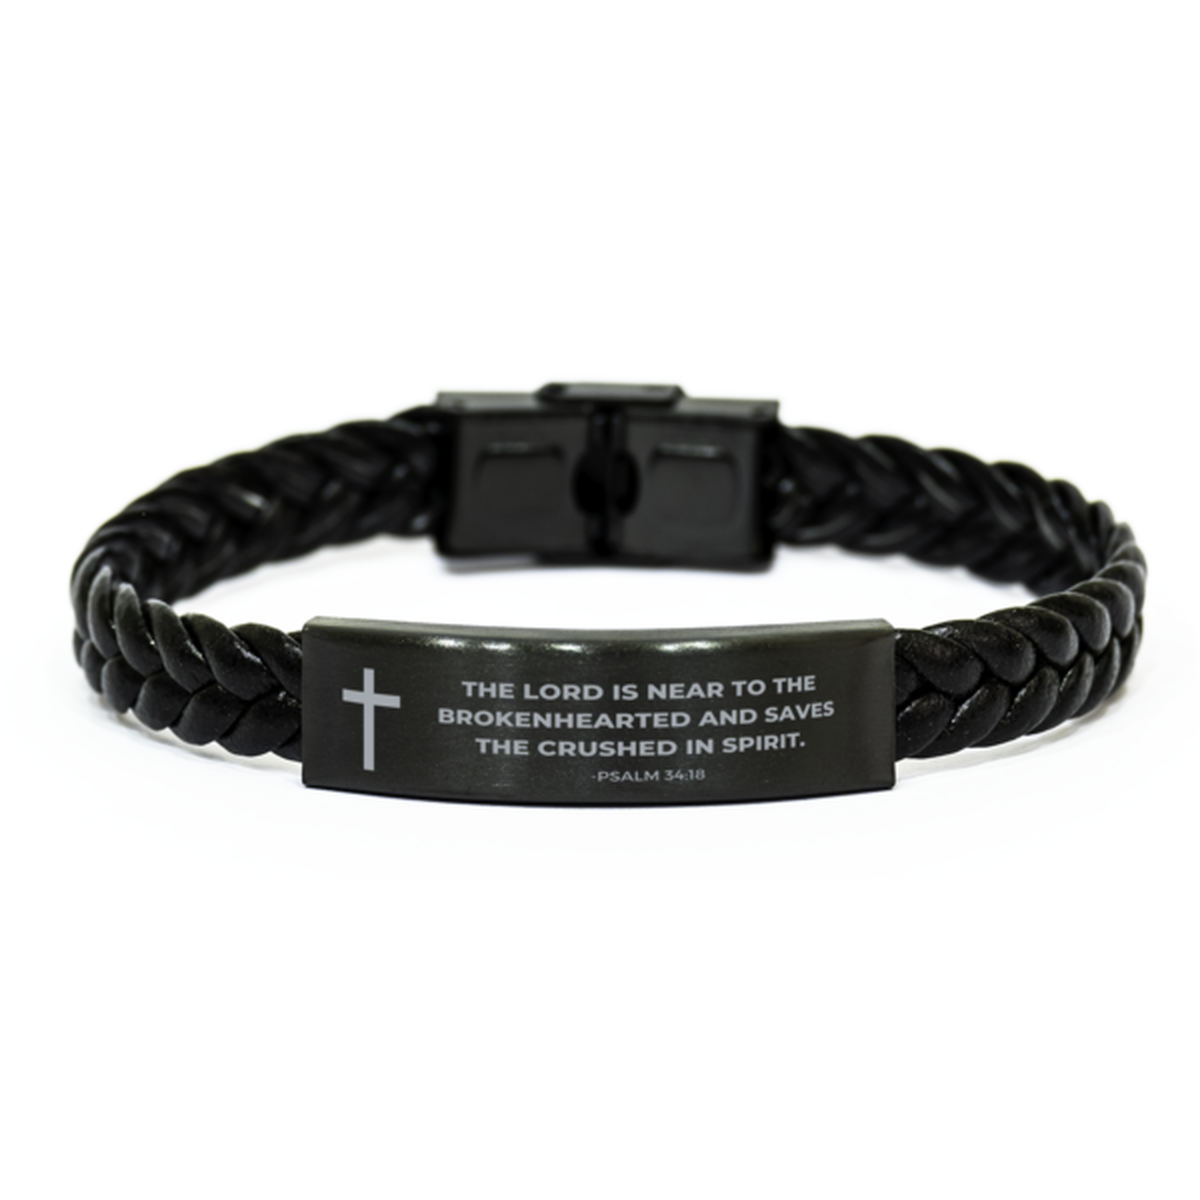 Baptism Gifts For Teenage Boys Girls, Christian Bible Verse Braided Leather Bracelet, The Lord is near to the brokenhearted, Catholic Confirmation Gifts for Son, Godson, Grandson, Nephew